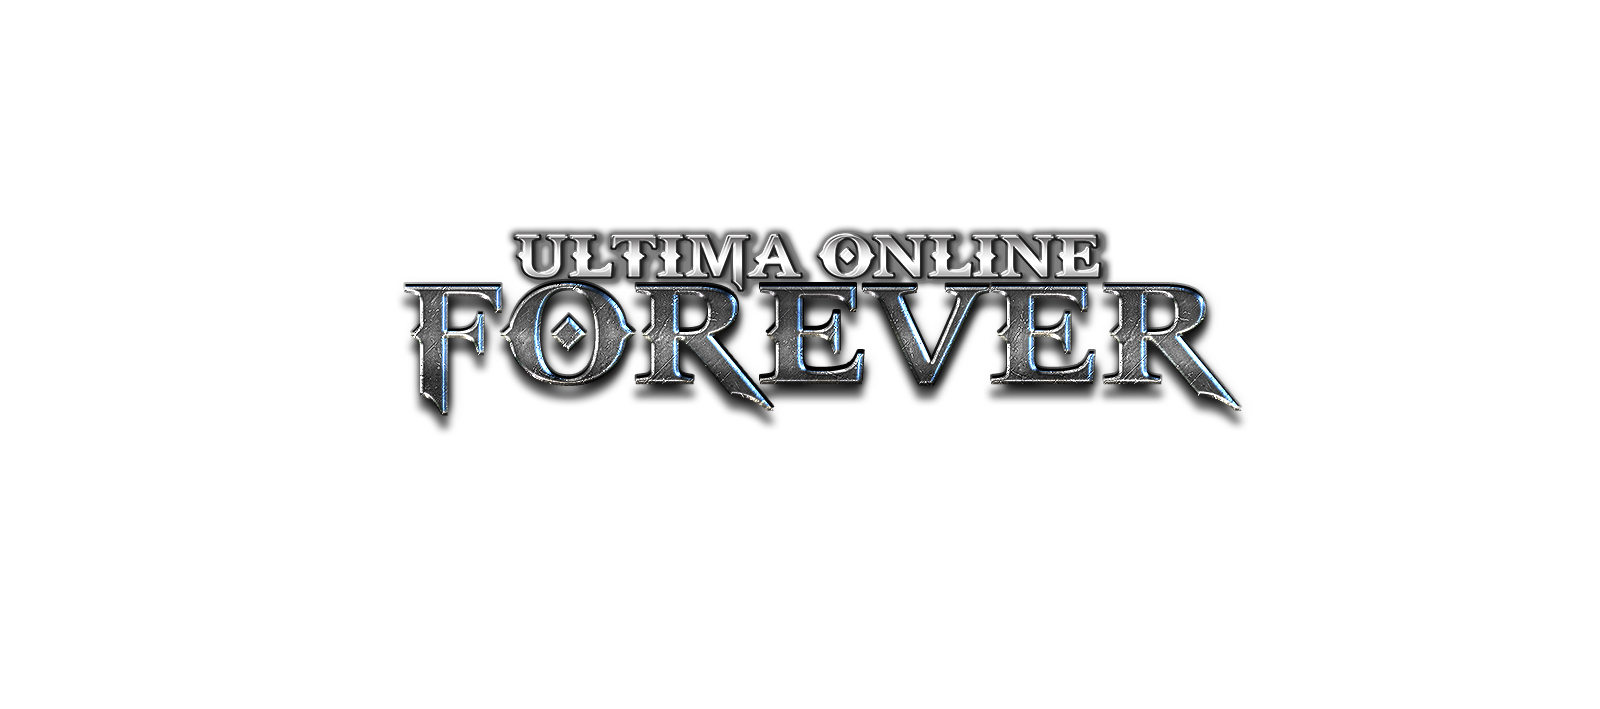 ultima online forever crafter template